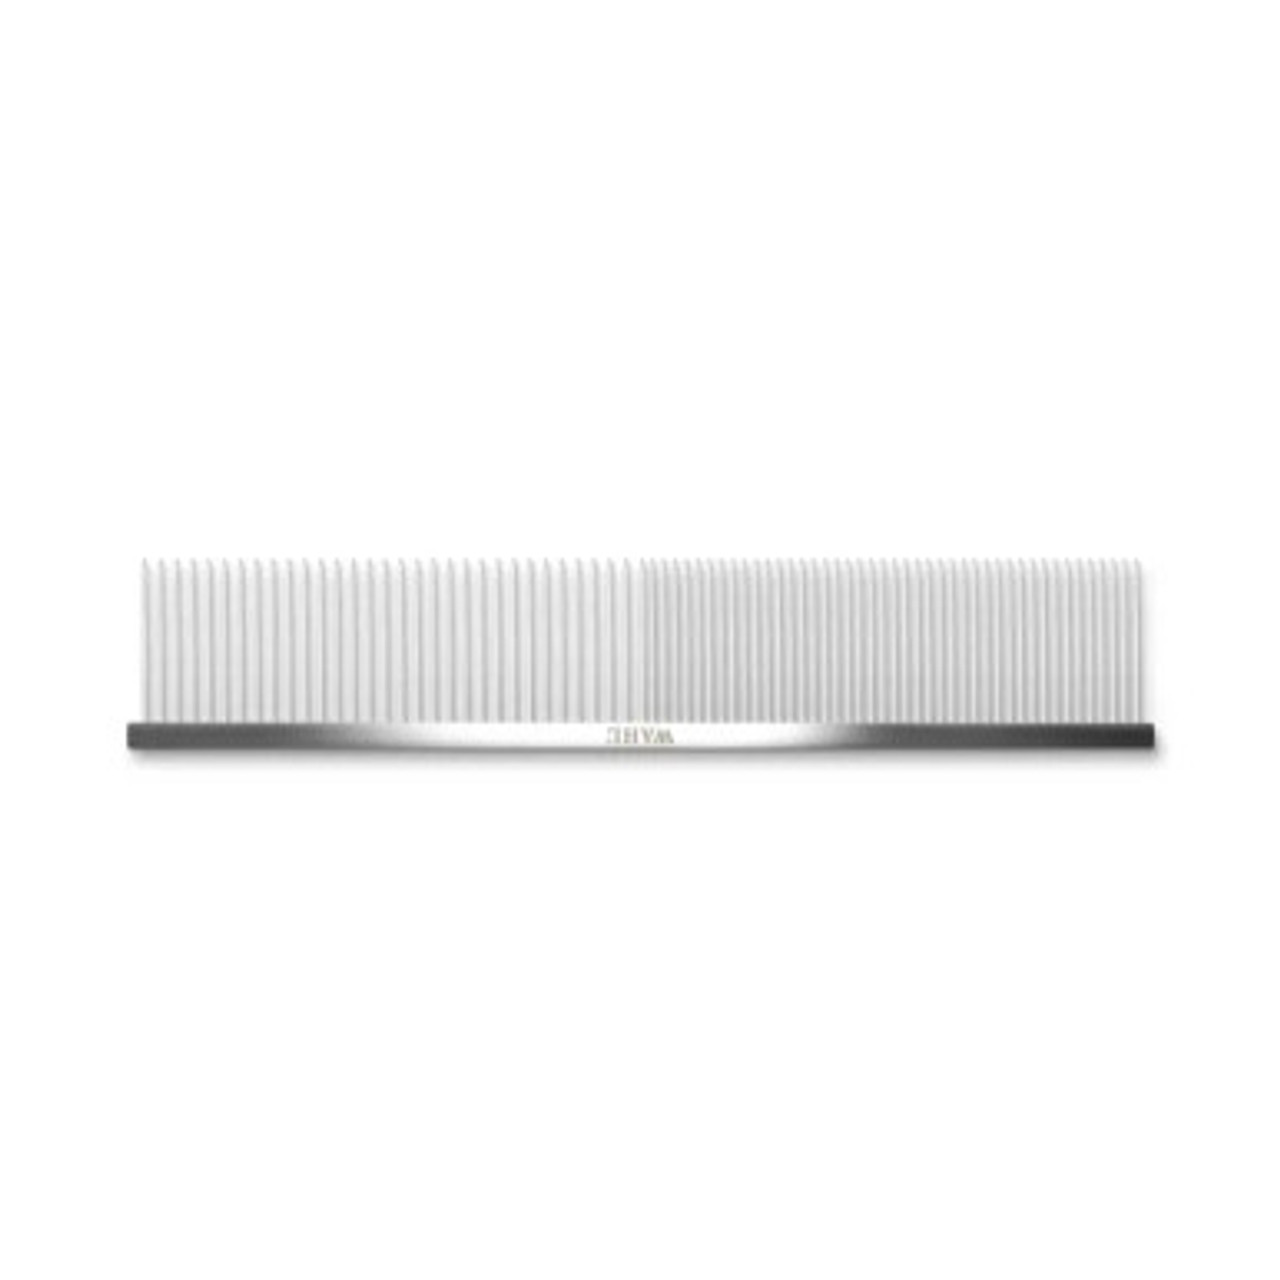 Wahl 9 1/2" Pro Styling Comb For Cats & Dogs